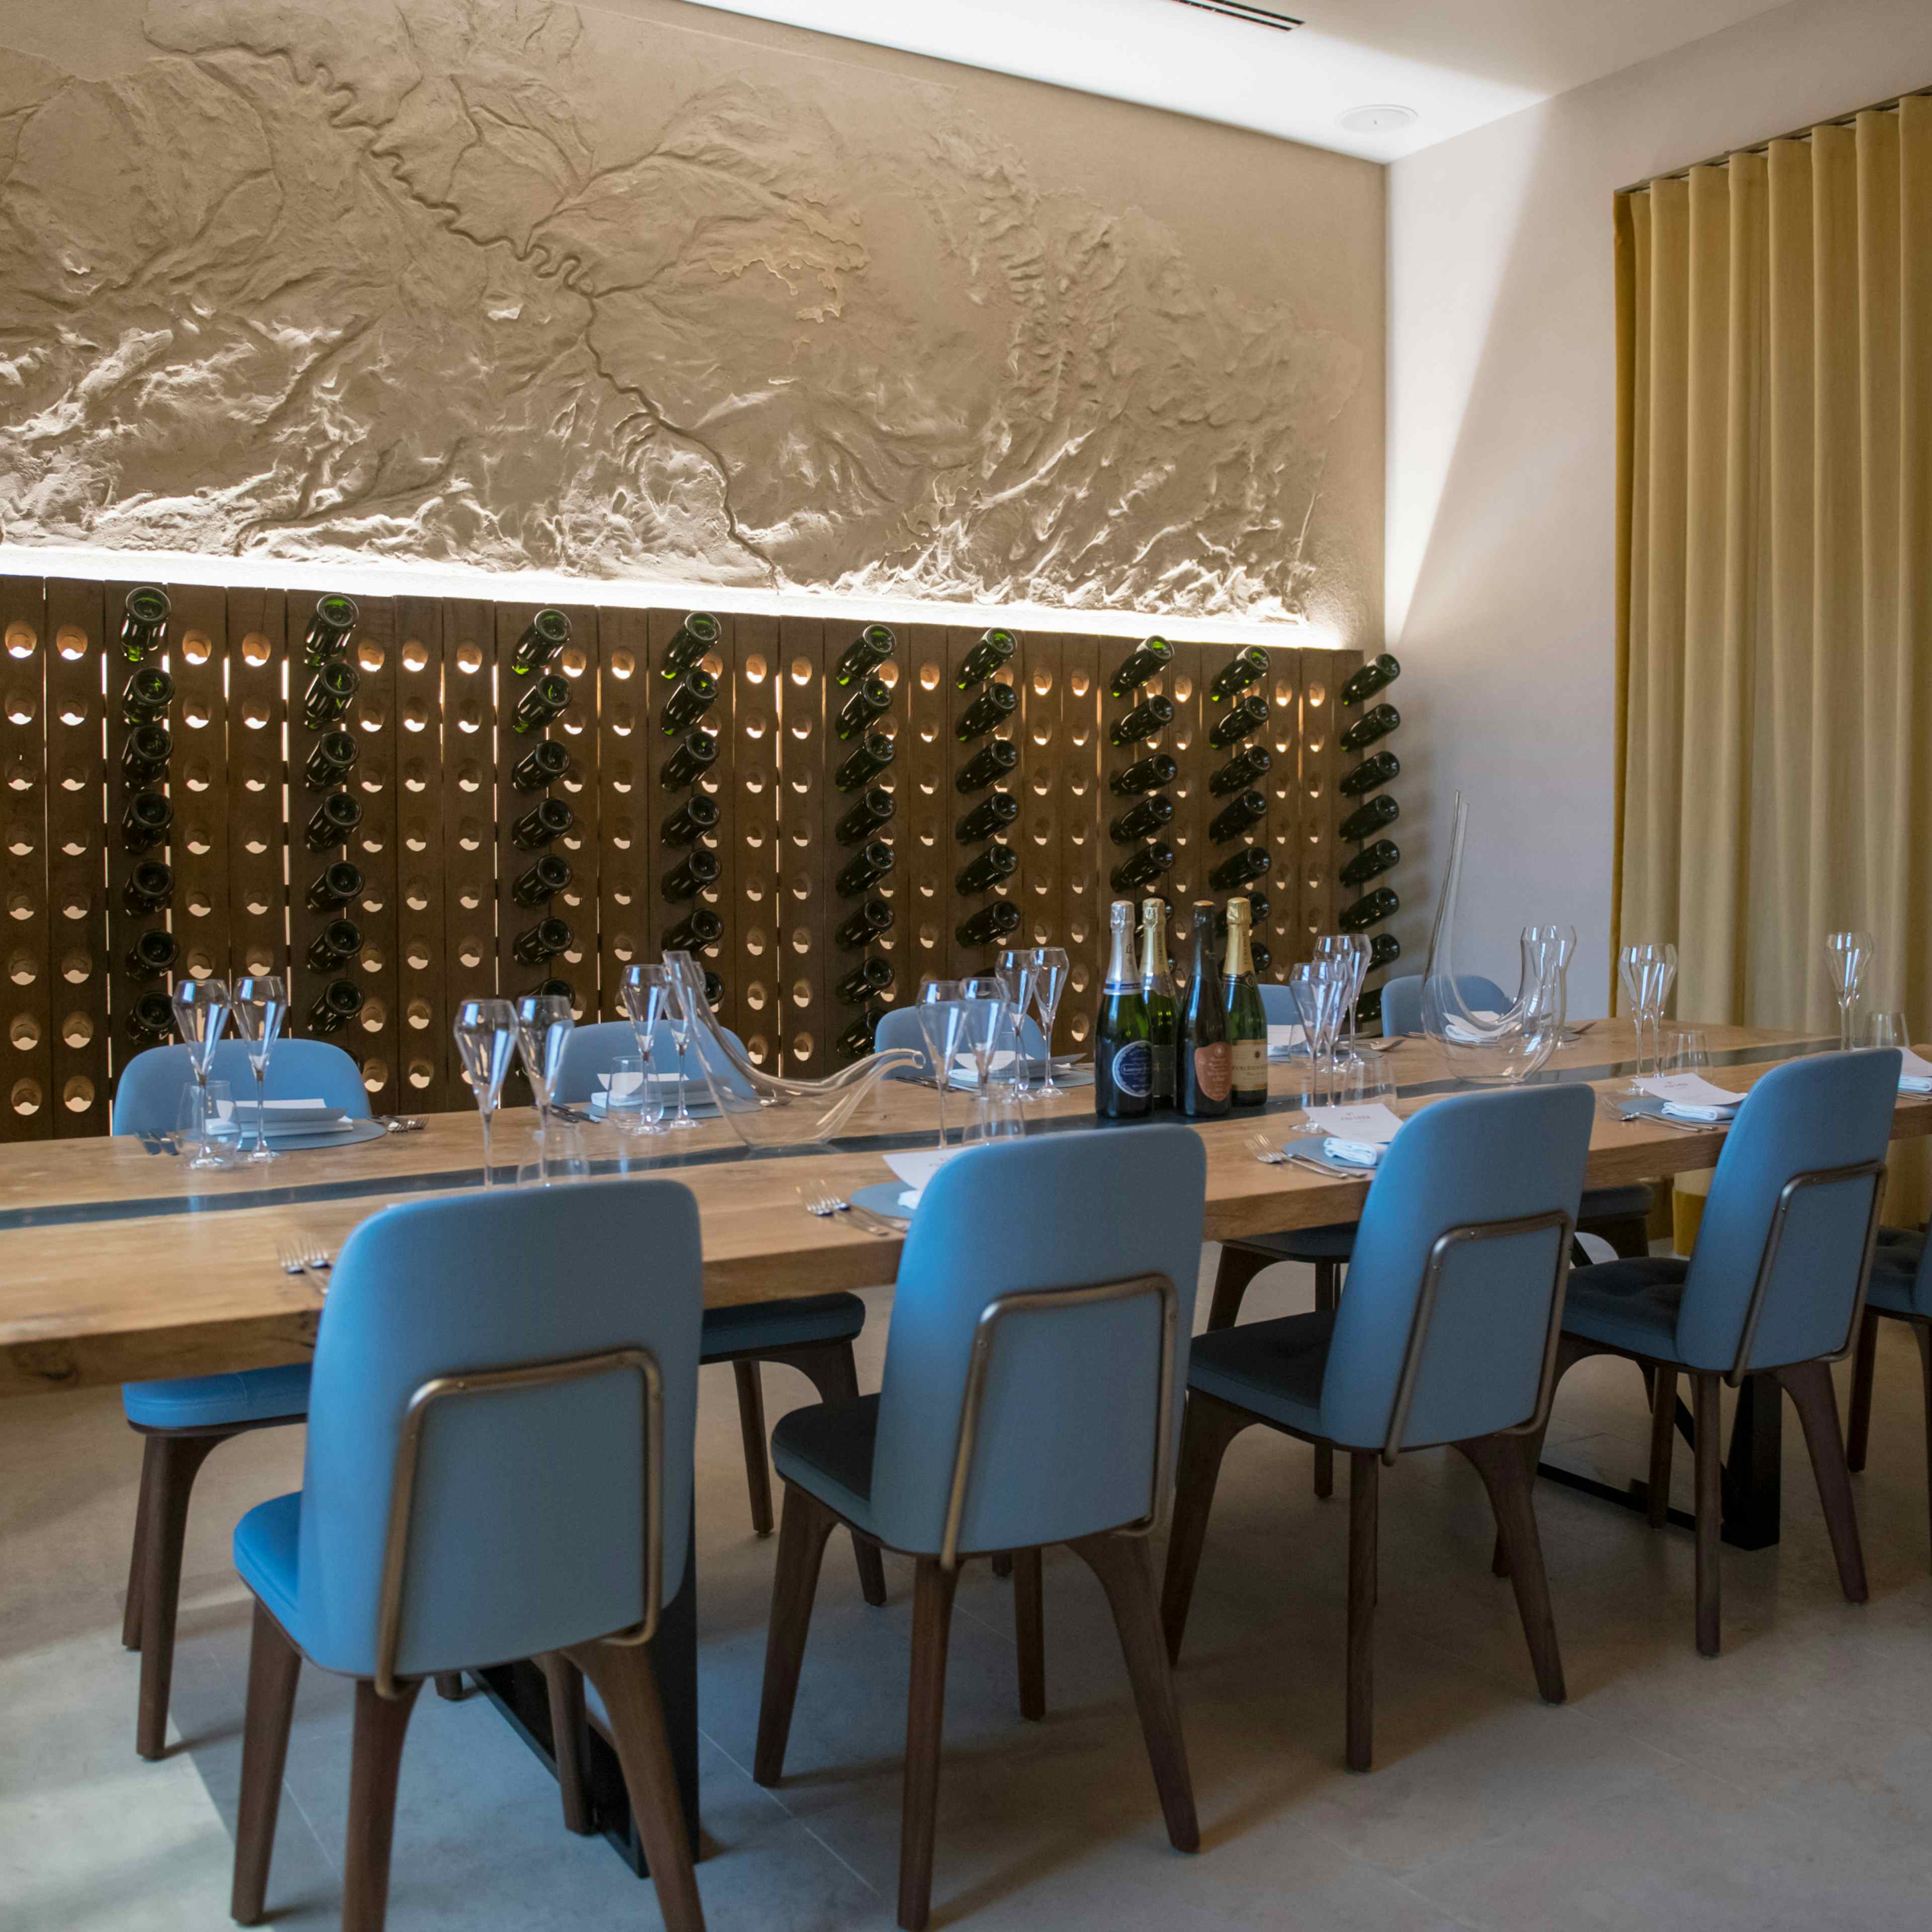 St Pancras Brasserie and Champagne Bar by Searcys  - Tasting Room  image 2